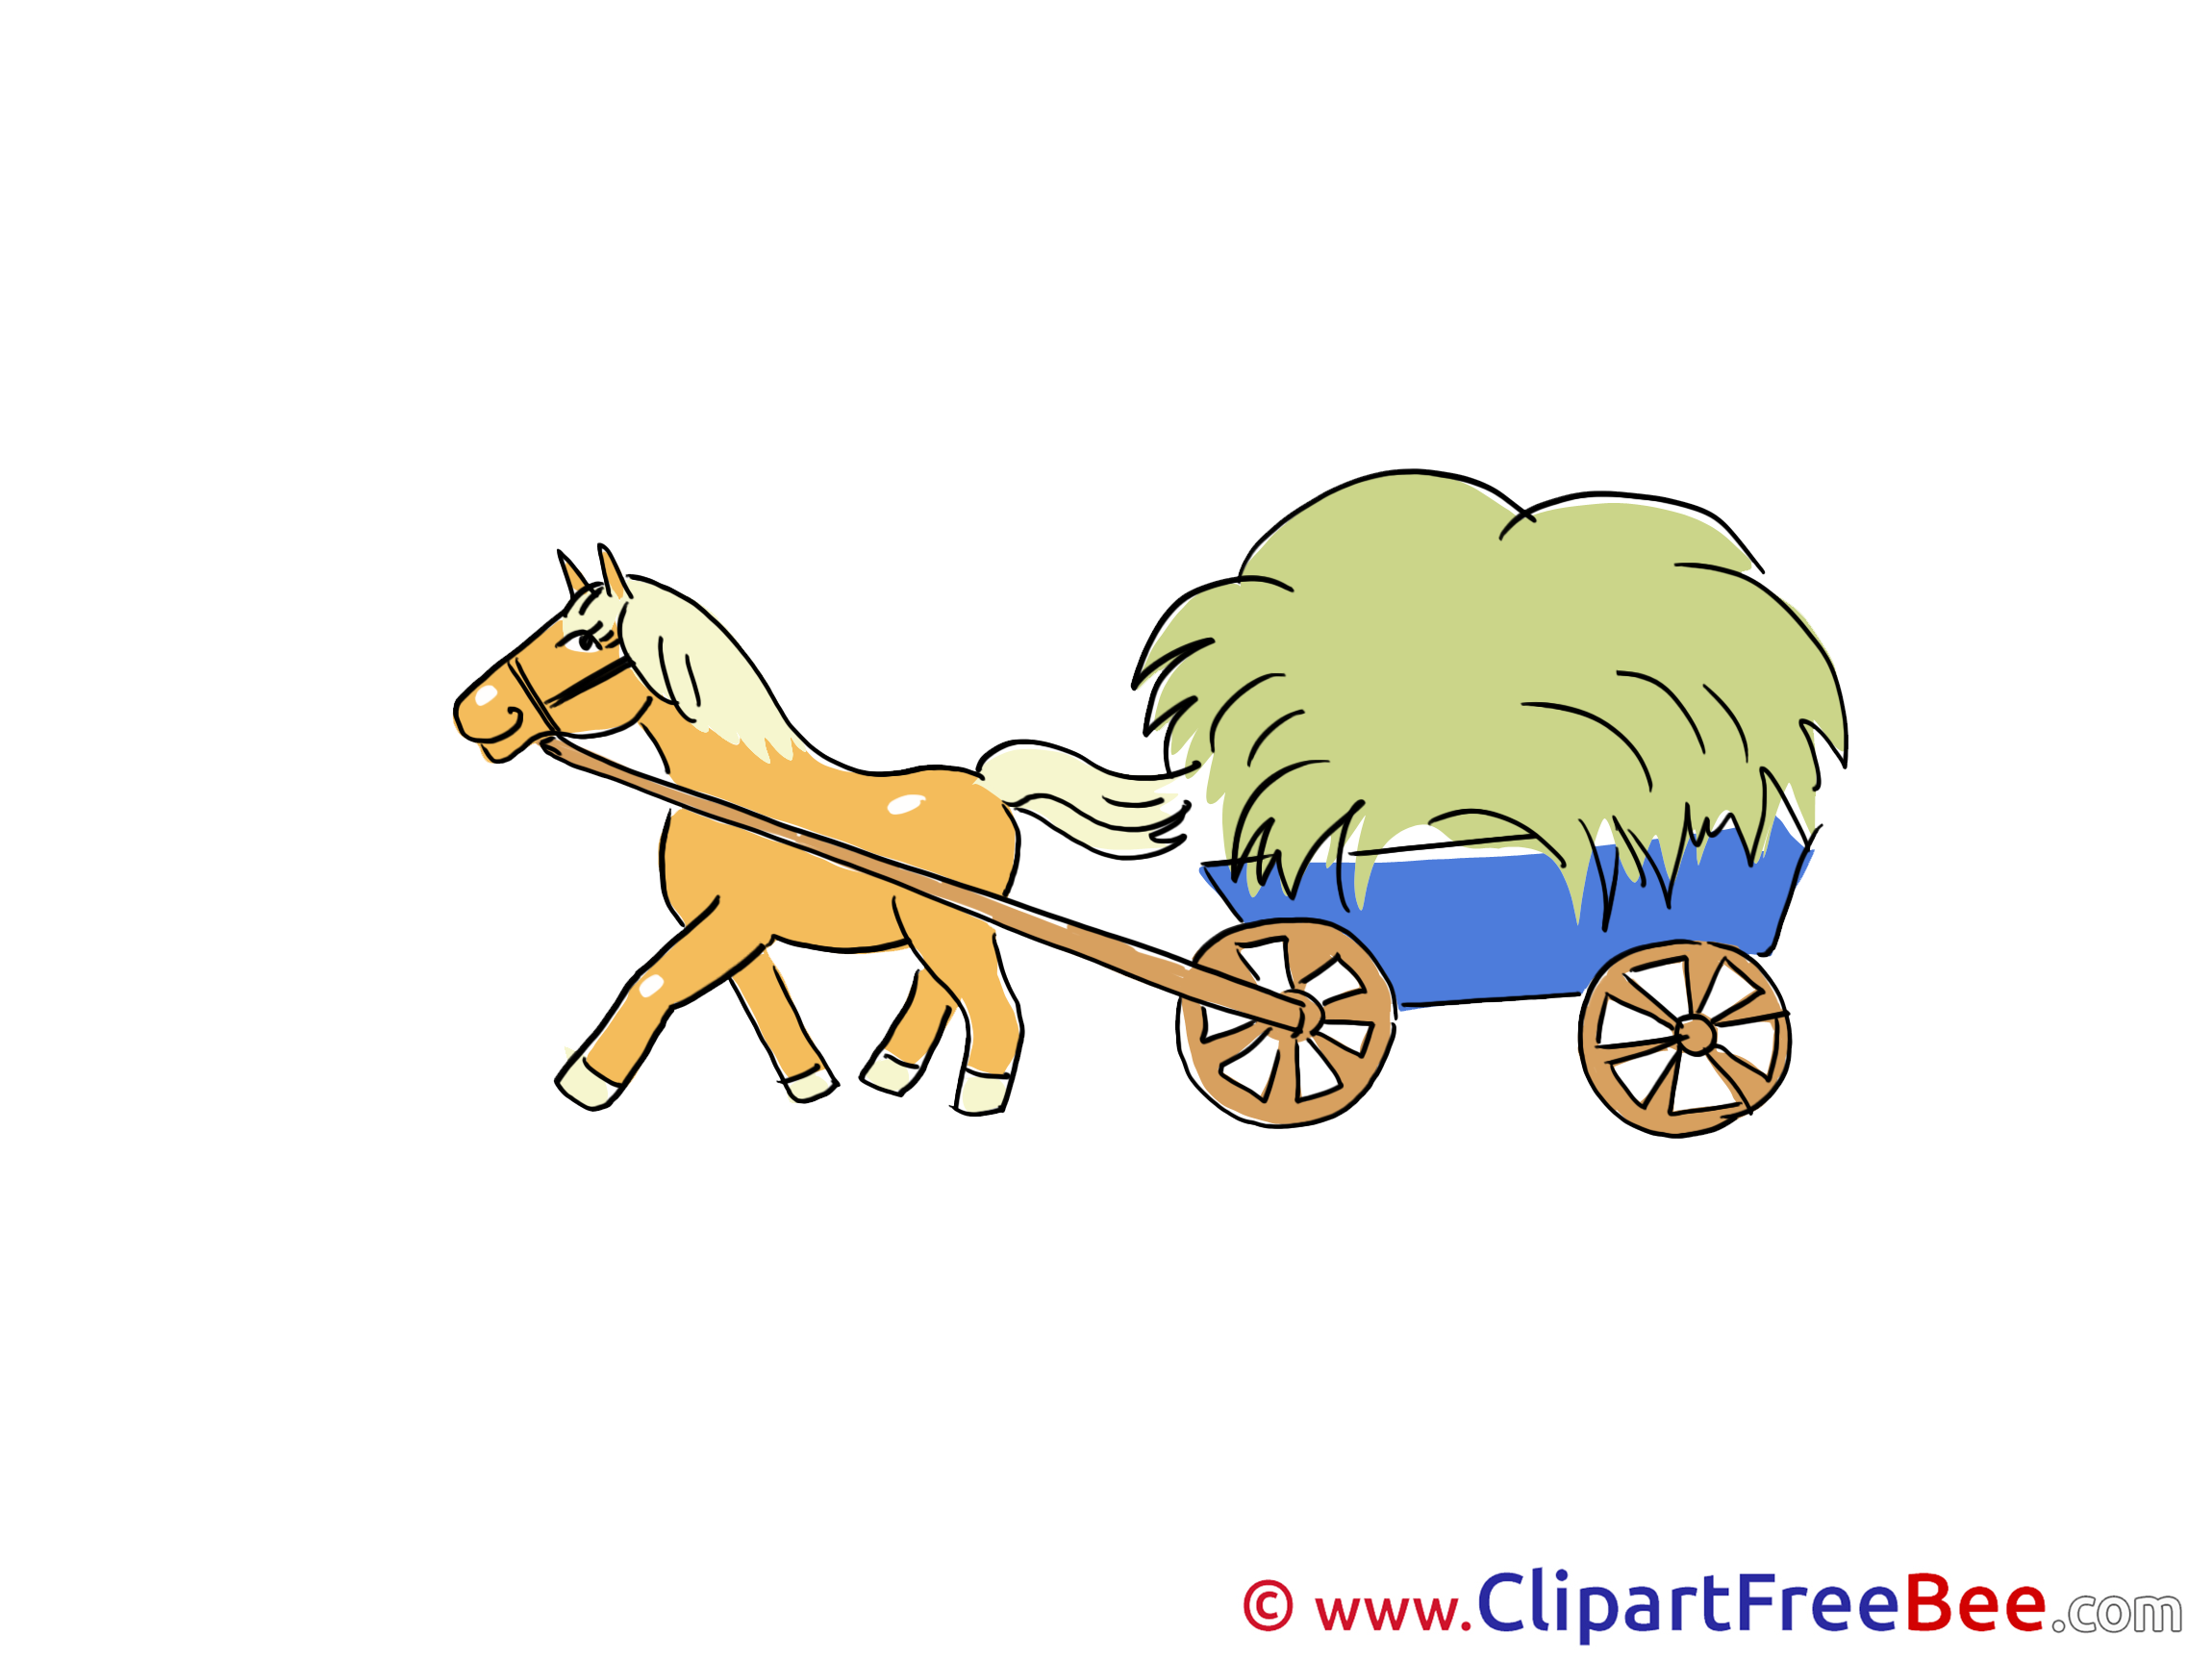 Wagon Hay Horse printable Images for download